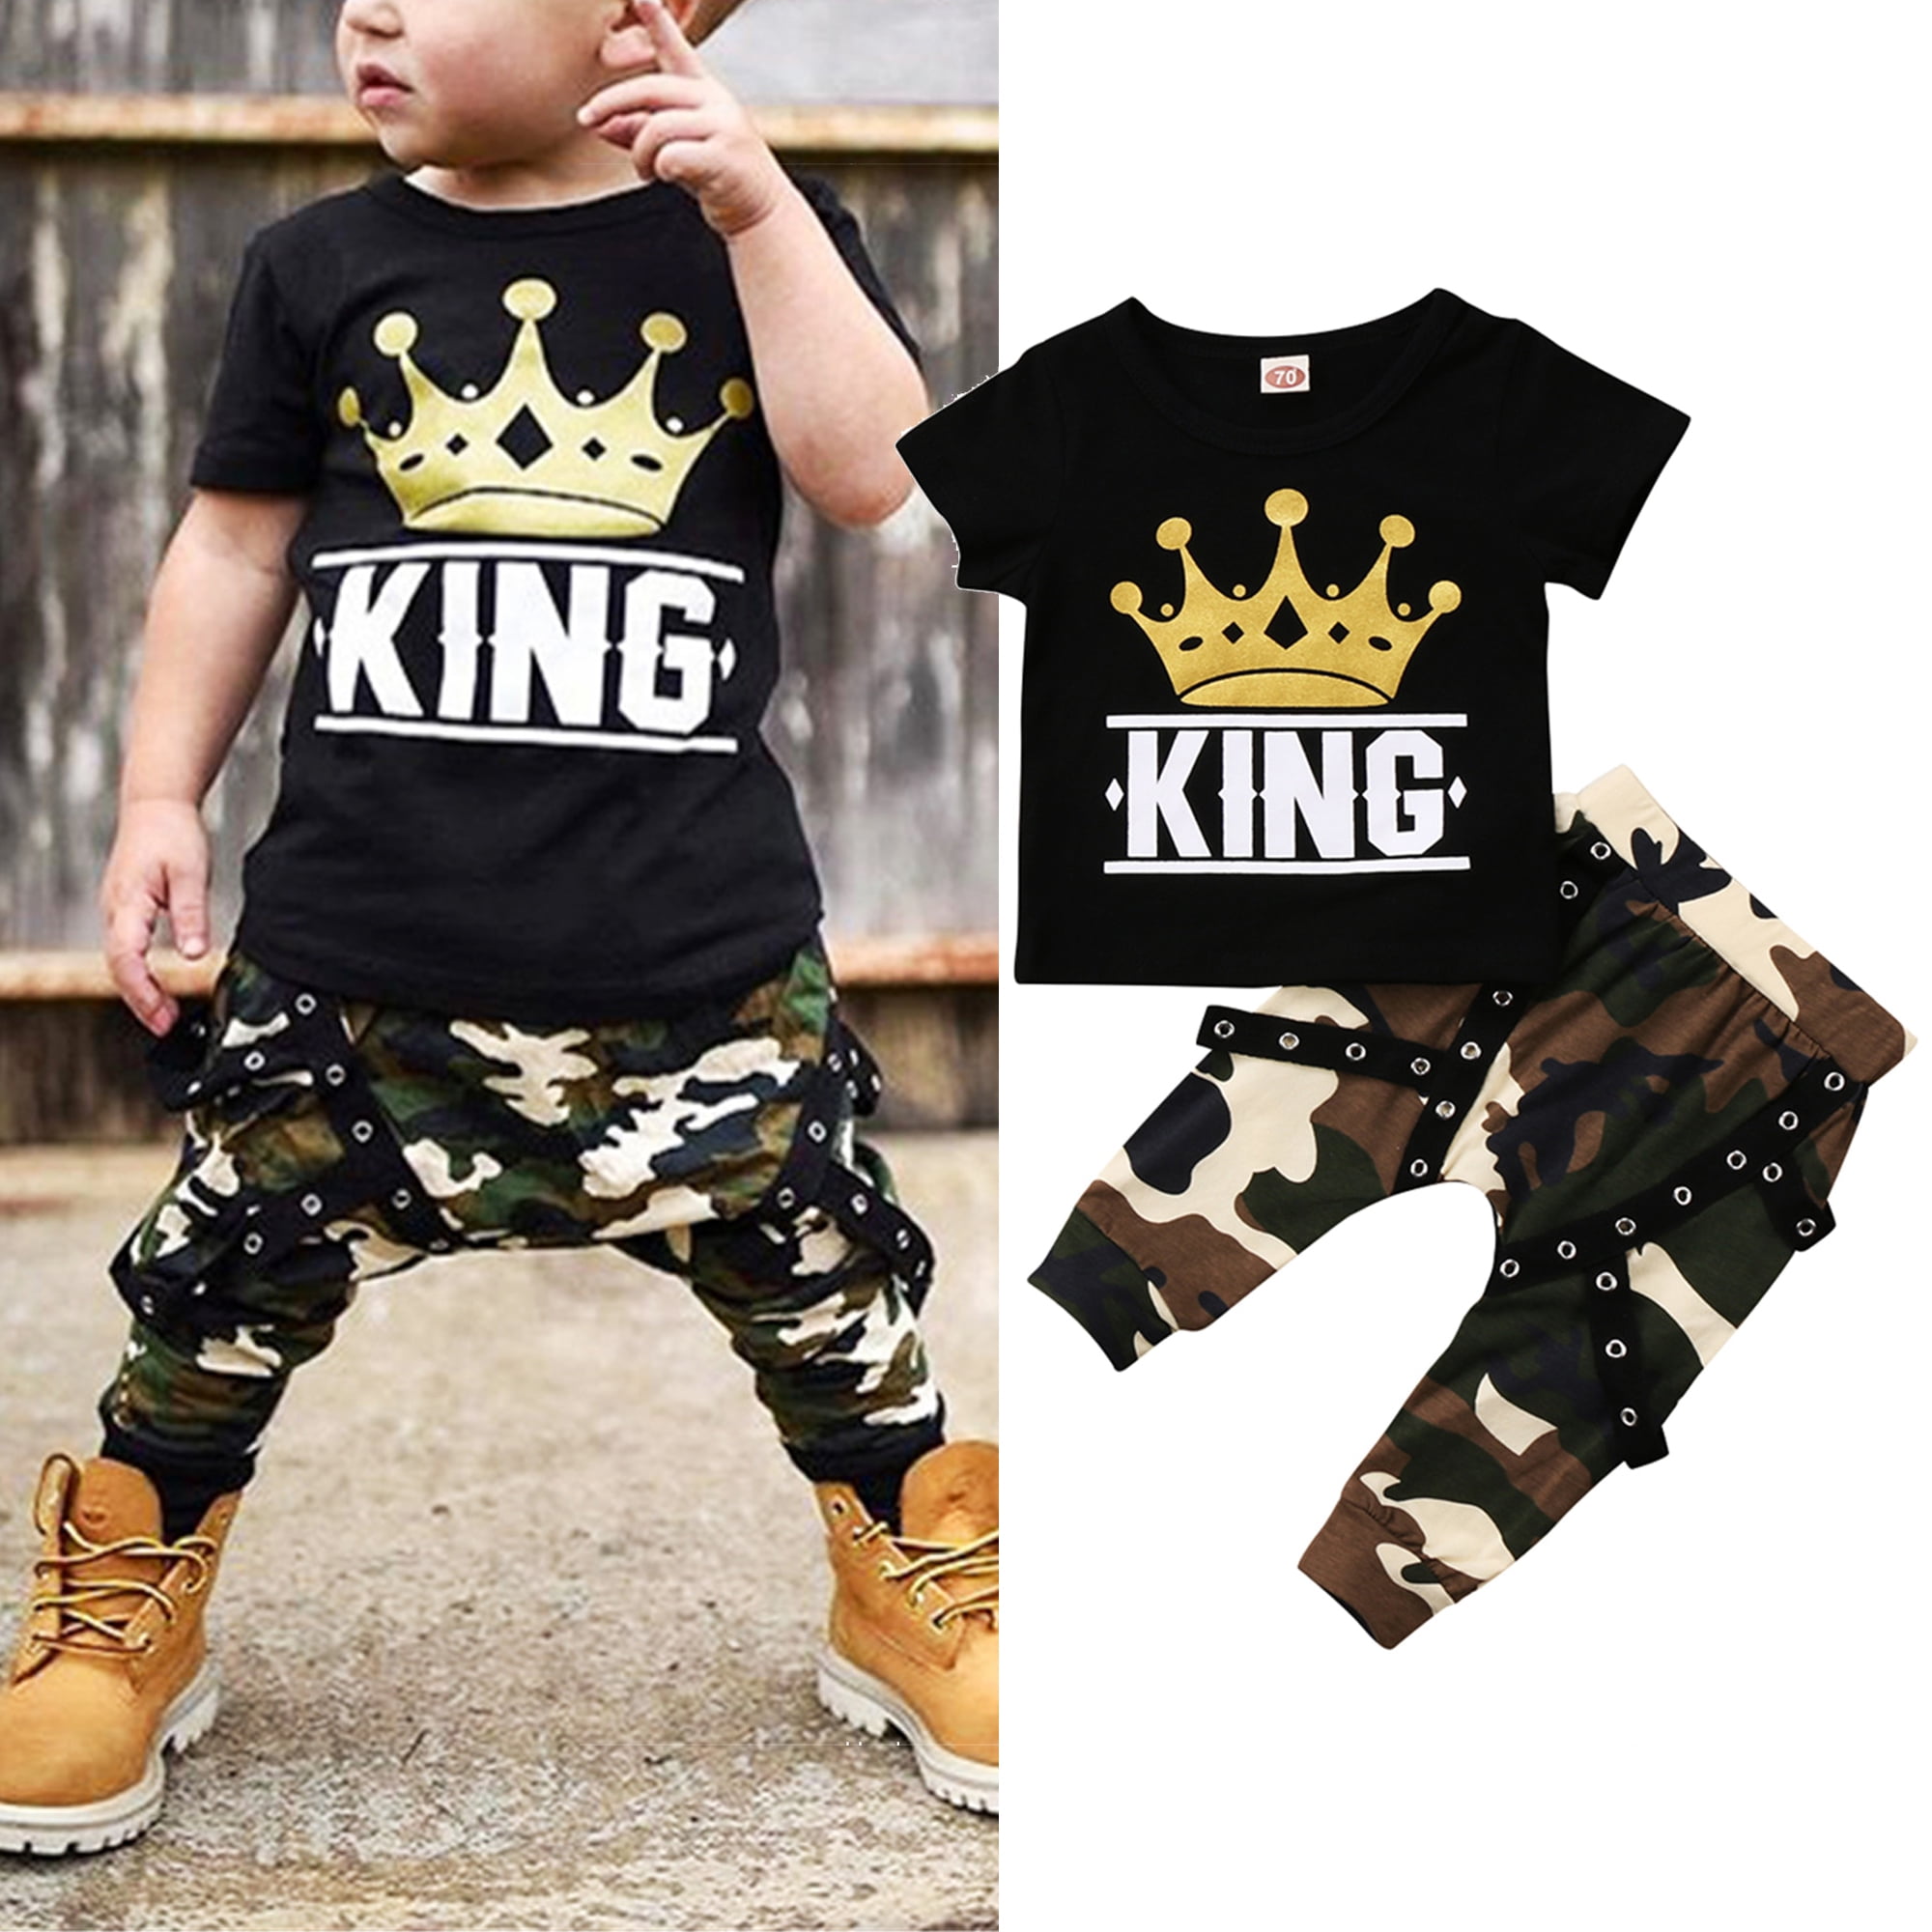 Baby Boy Clothes Newborn Boy Outfits Infant Short Sleeve Romper Camo Pants  Hat Summer Clothing Set S Black 1218 Months price in UAE  Amazon UAE   kanbkam